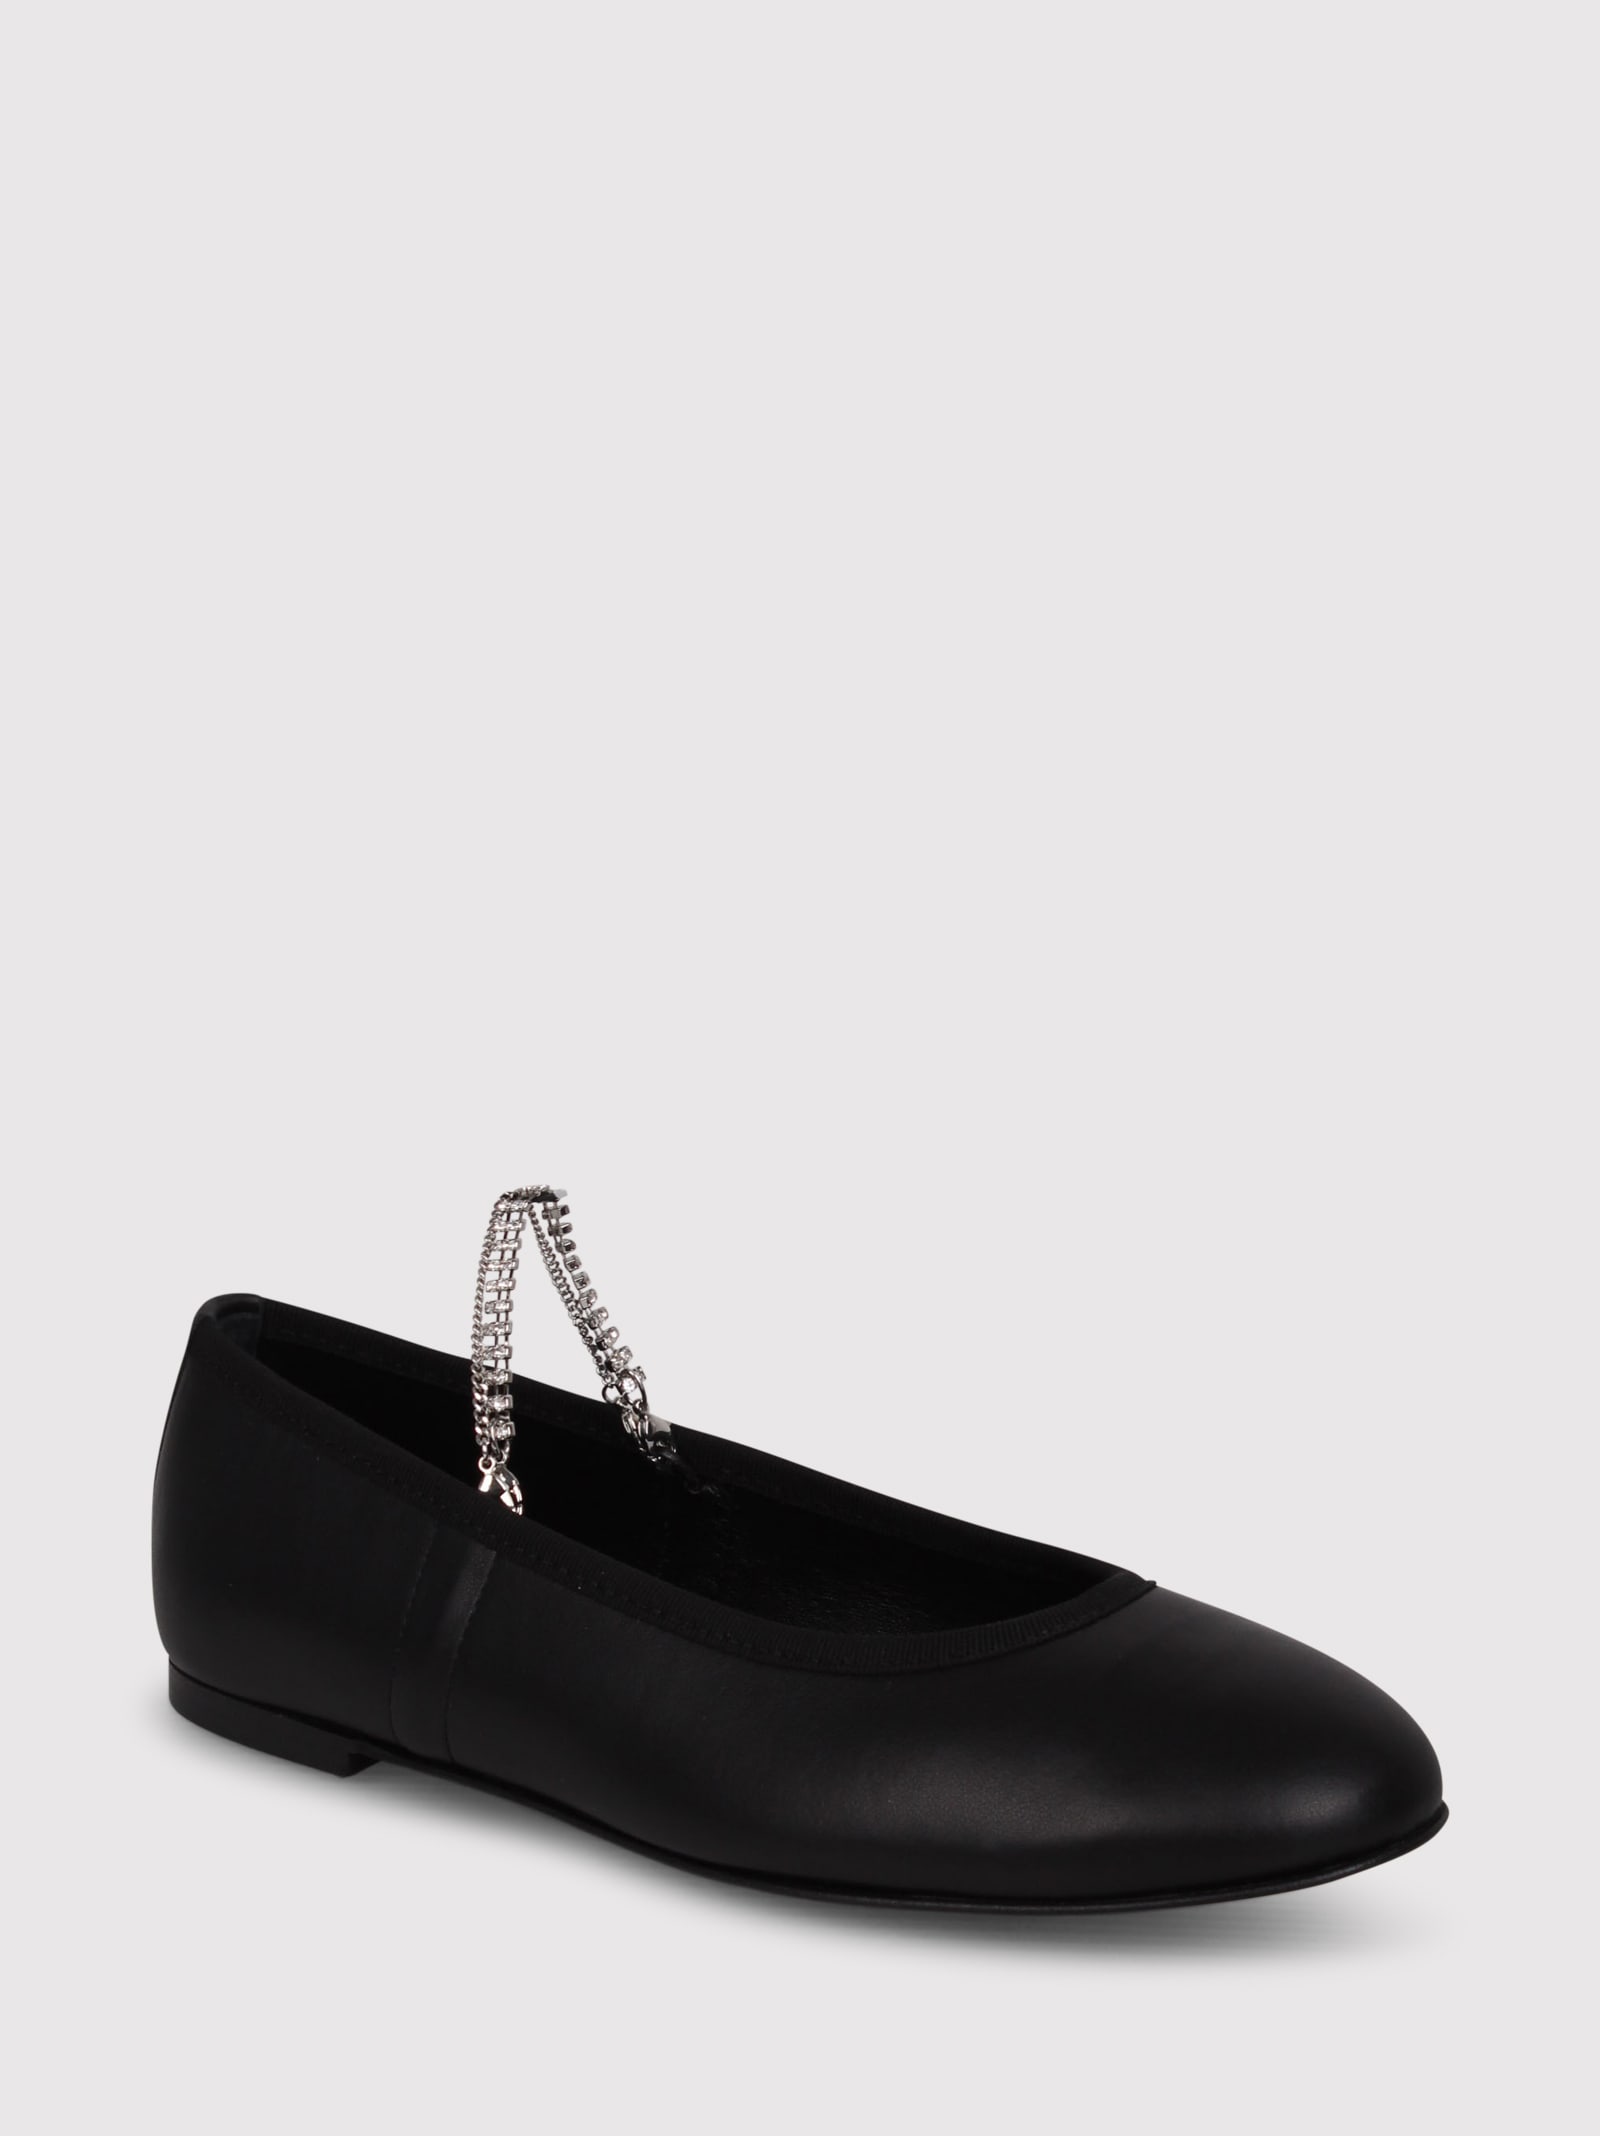 Shop Kate Cate Juliette Leather Ballerina Shoes